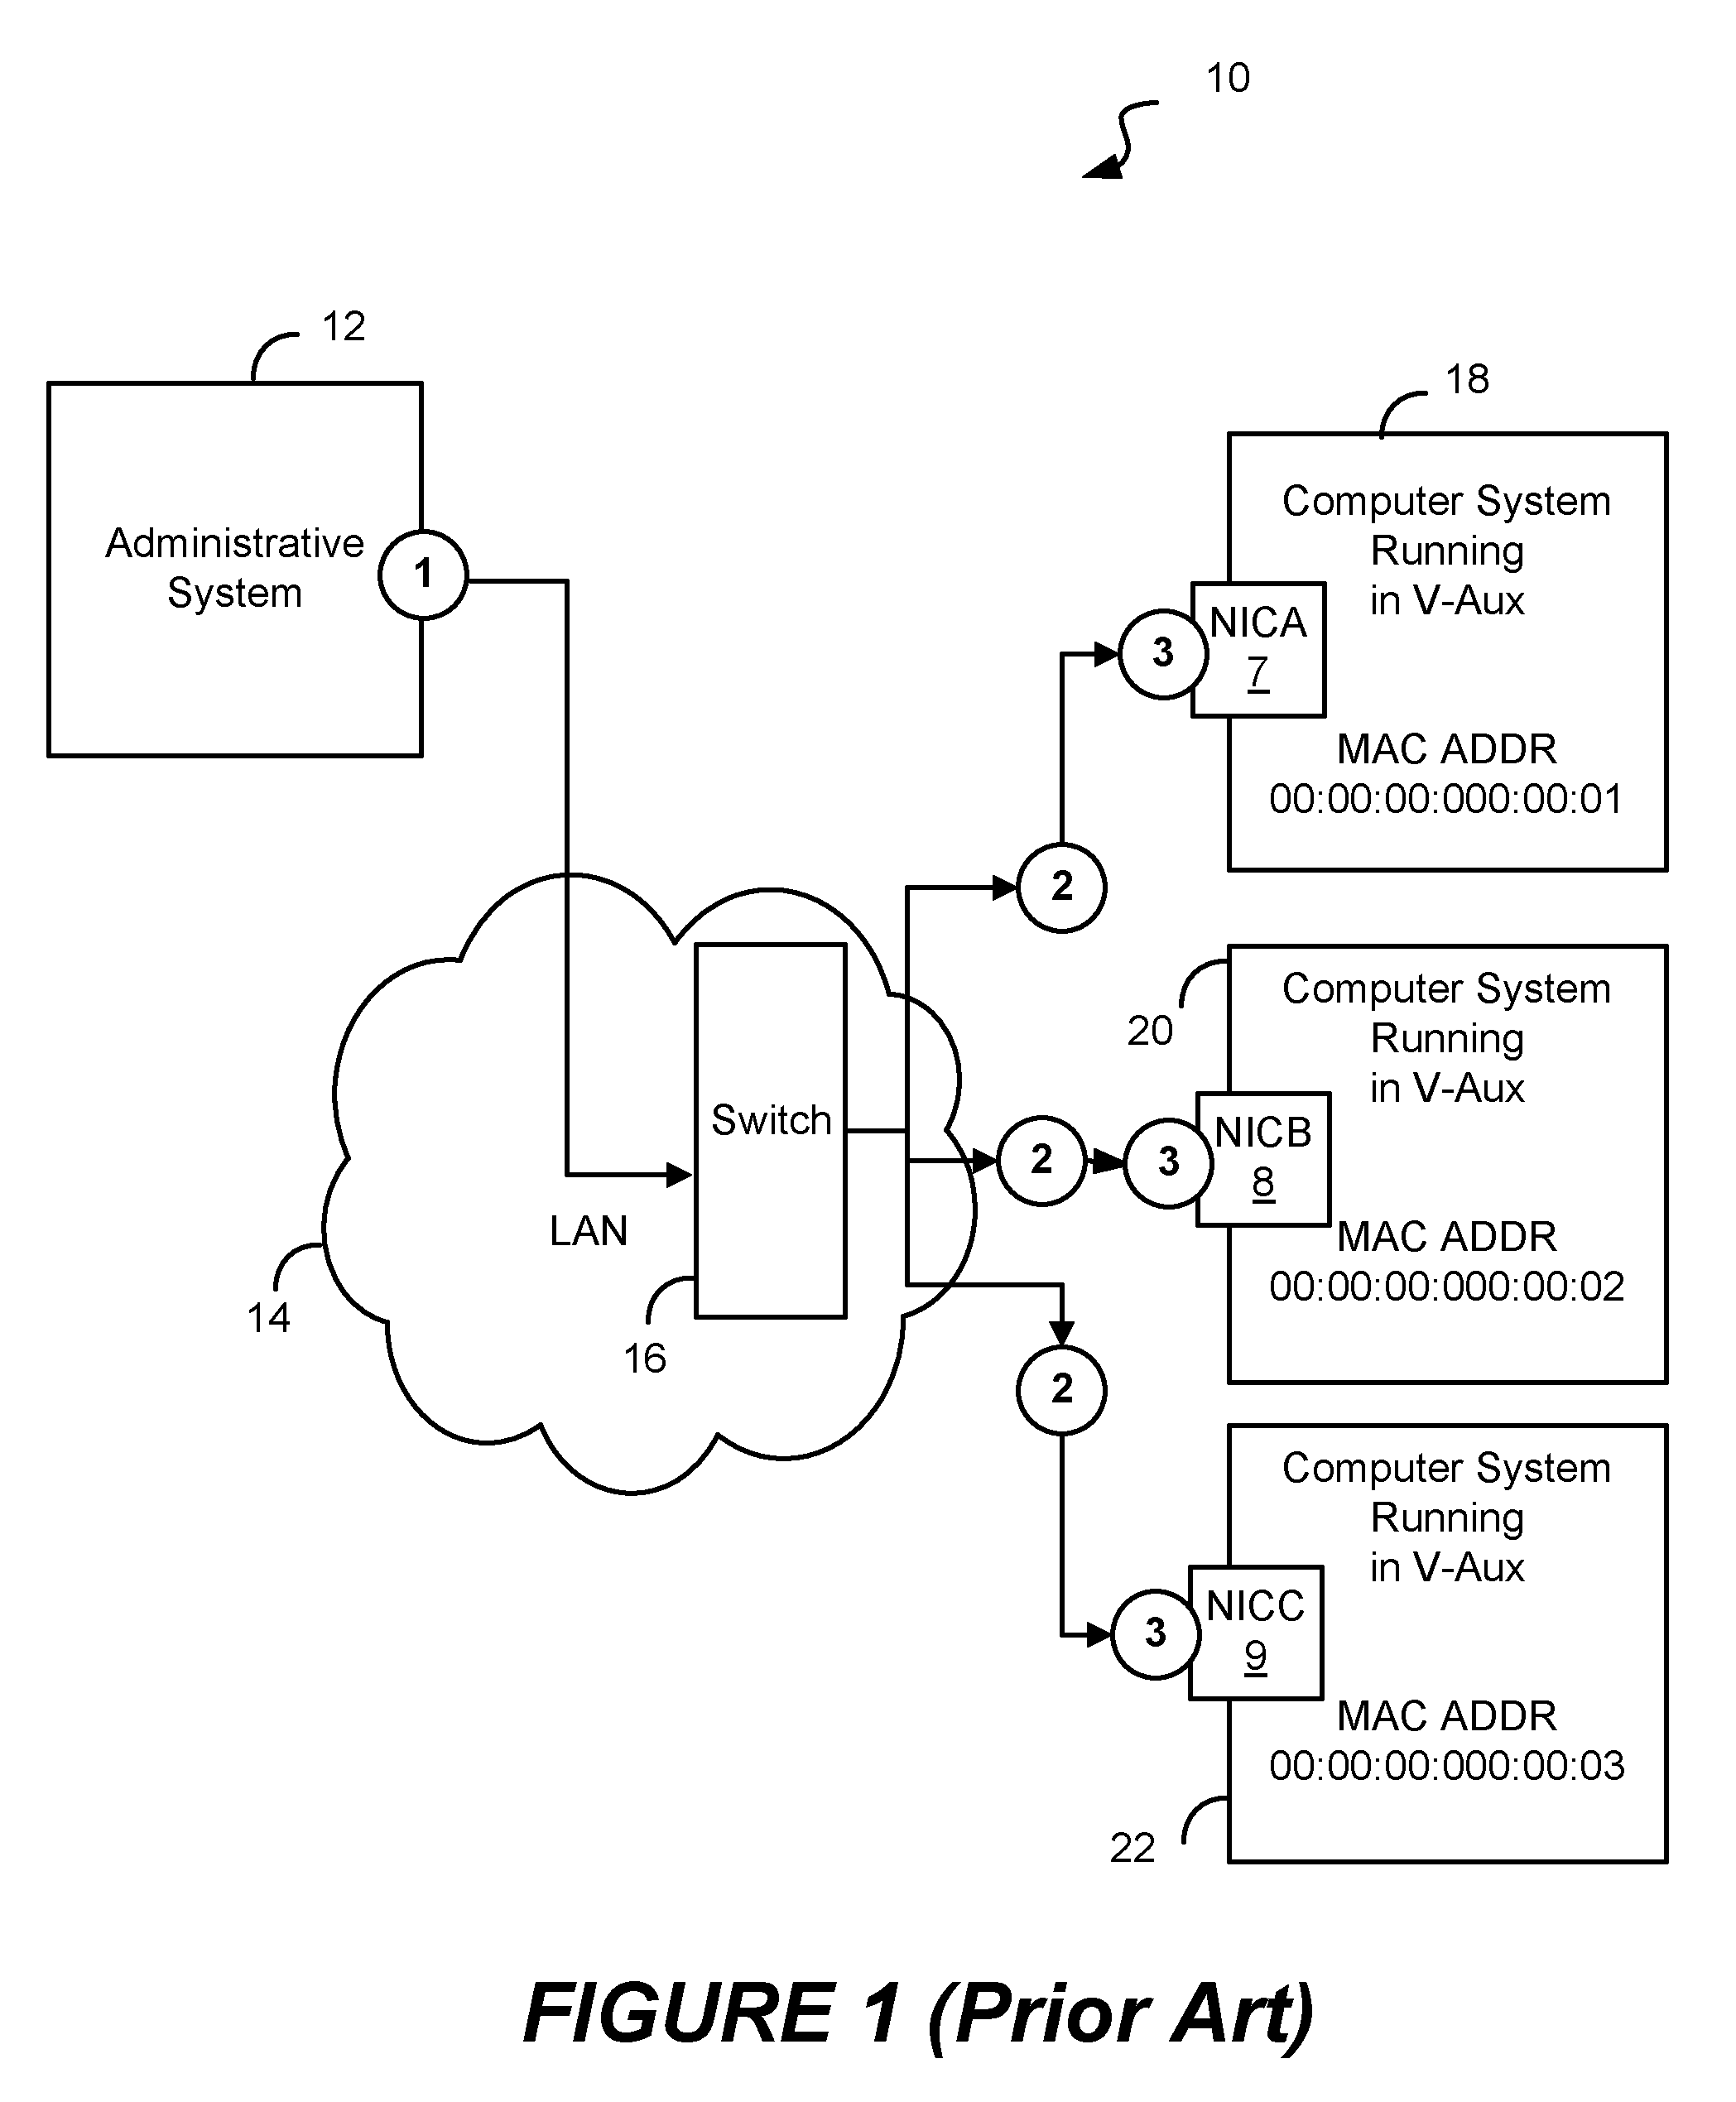 Method and system for supporting wake-on-lan in a virtualized environment